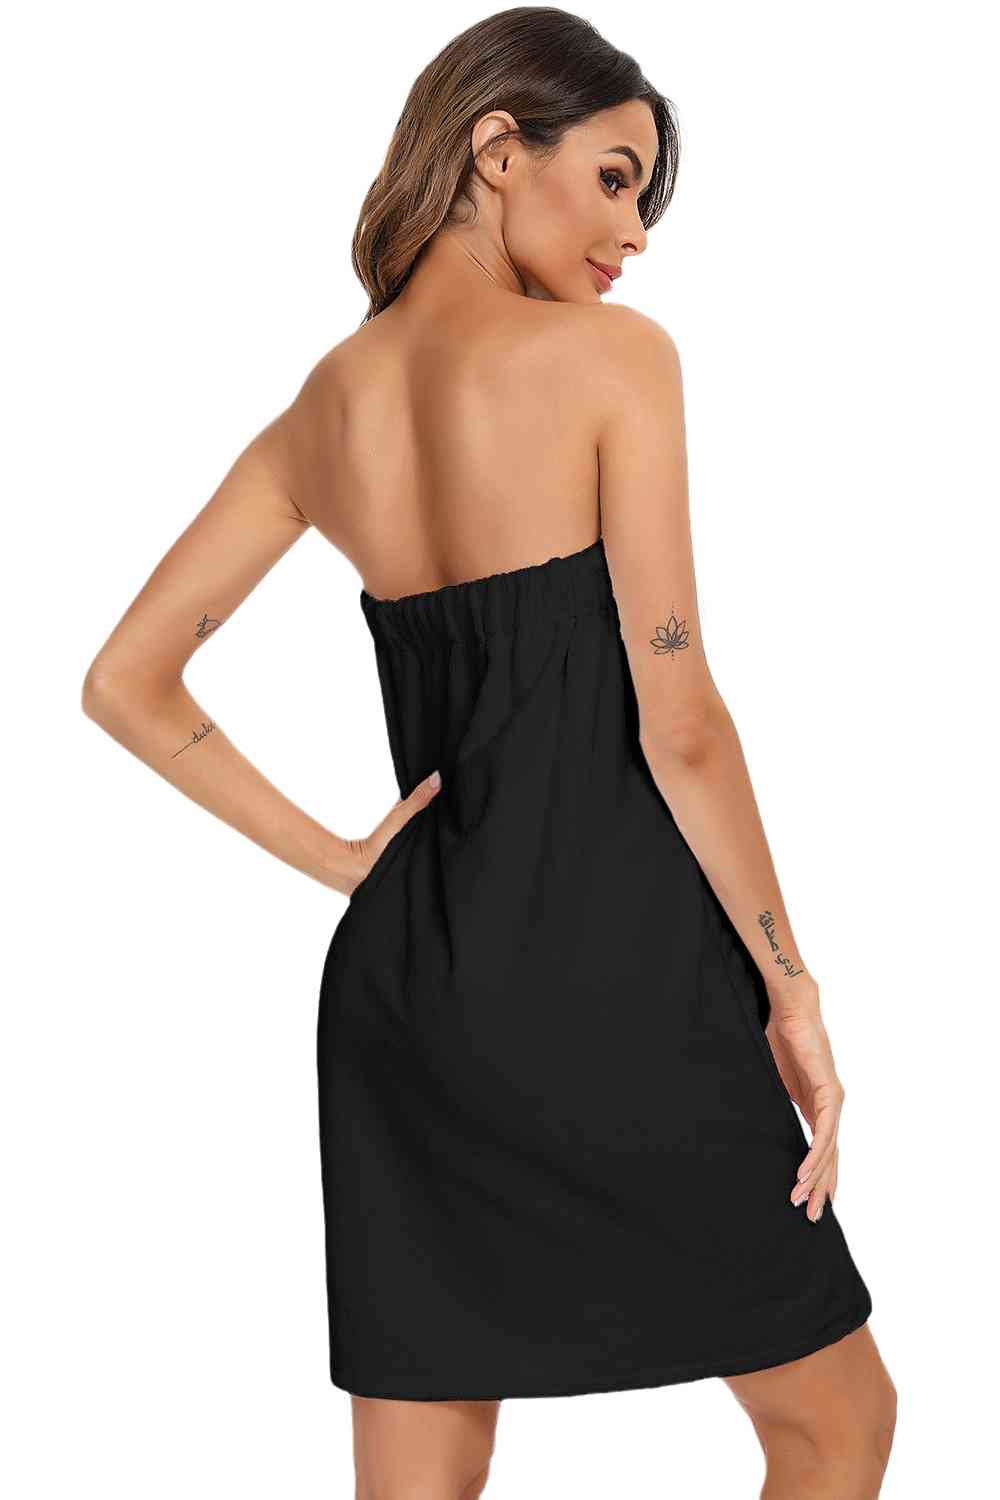 Strapless Robe with pocket - Opulence & Essence